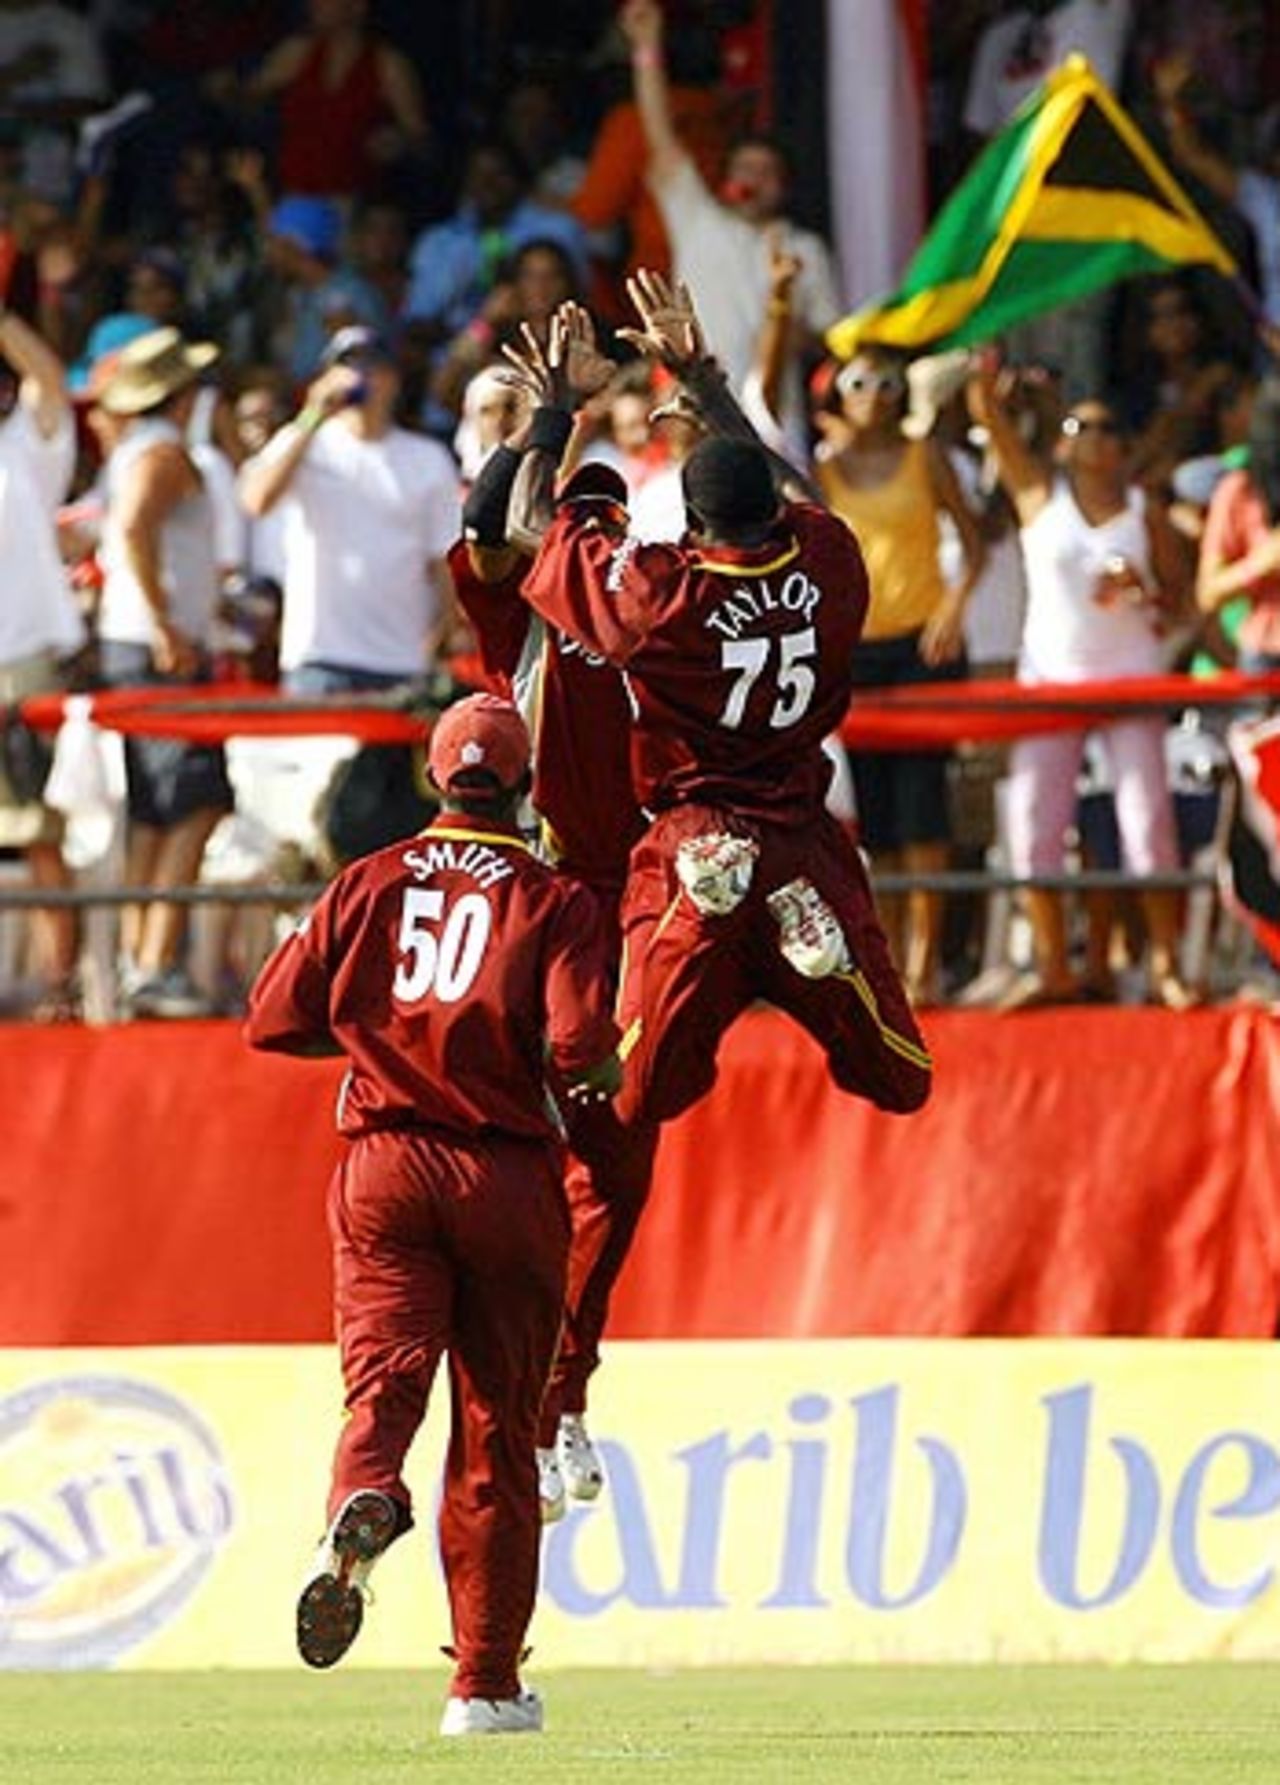 West Indies players celebrate the fall of Virender Sehwag, West Indies v India, 5th ODI, Trinidad, May 28, 2006